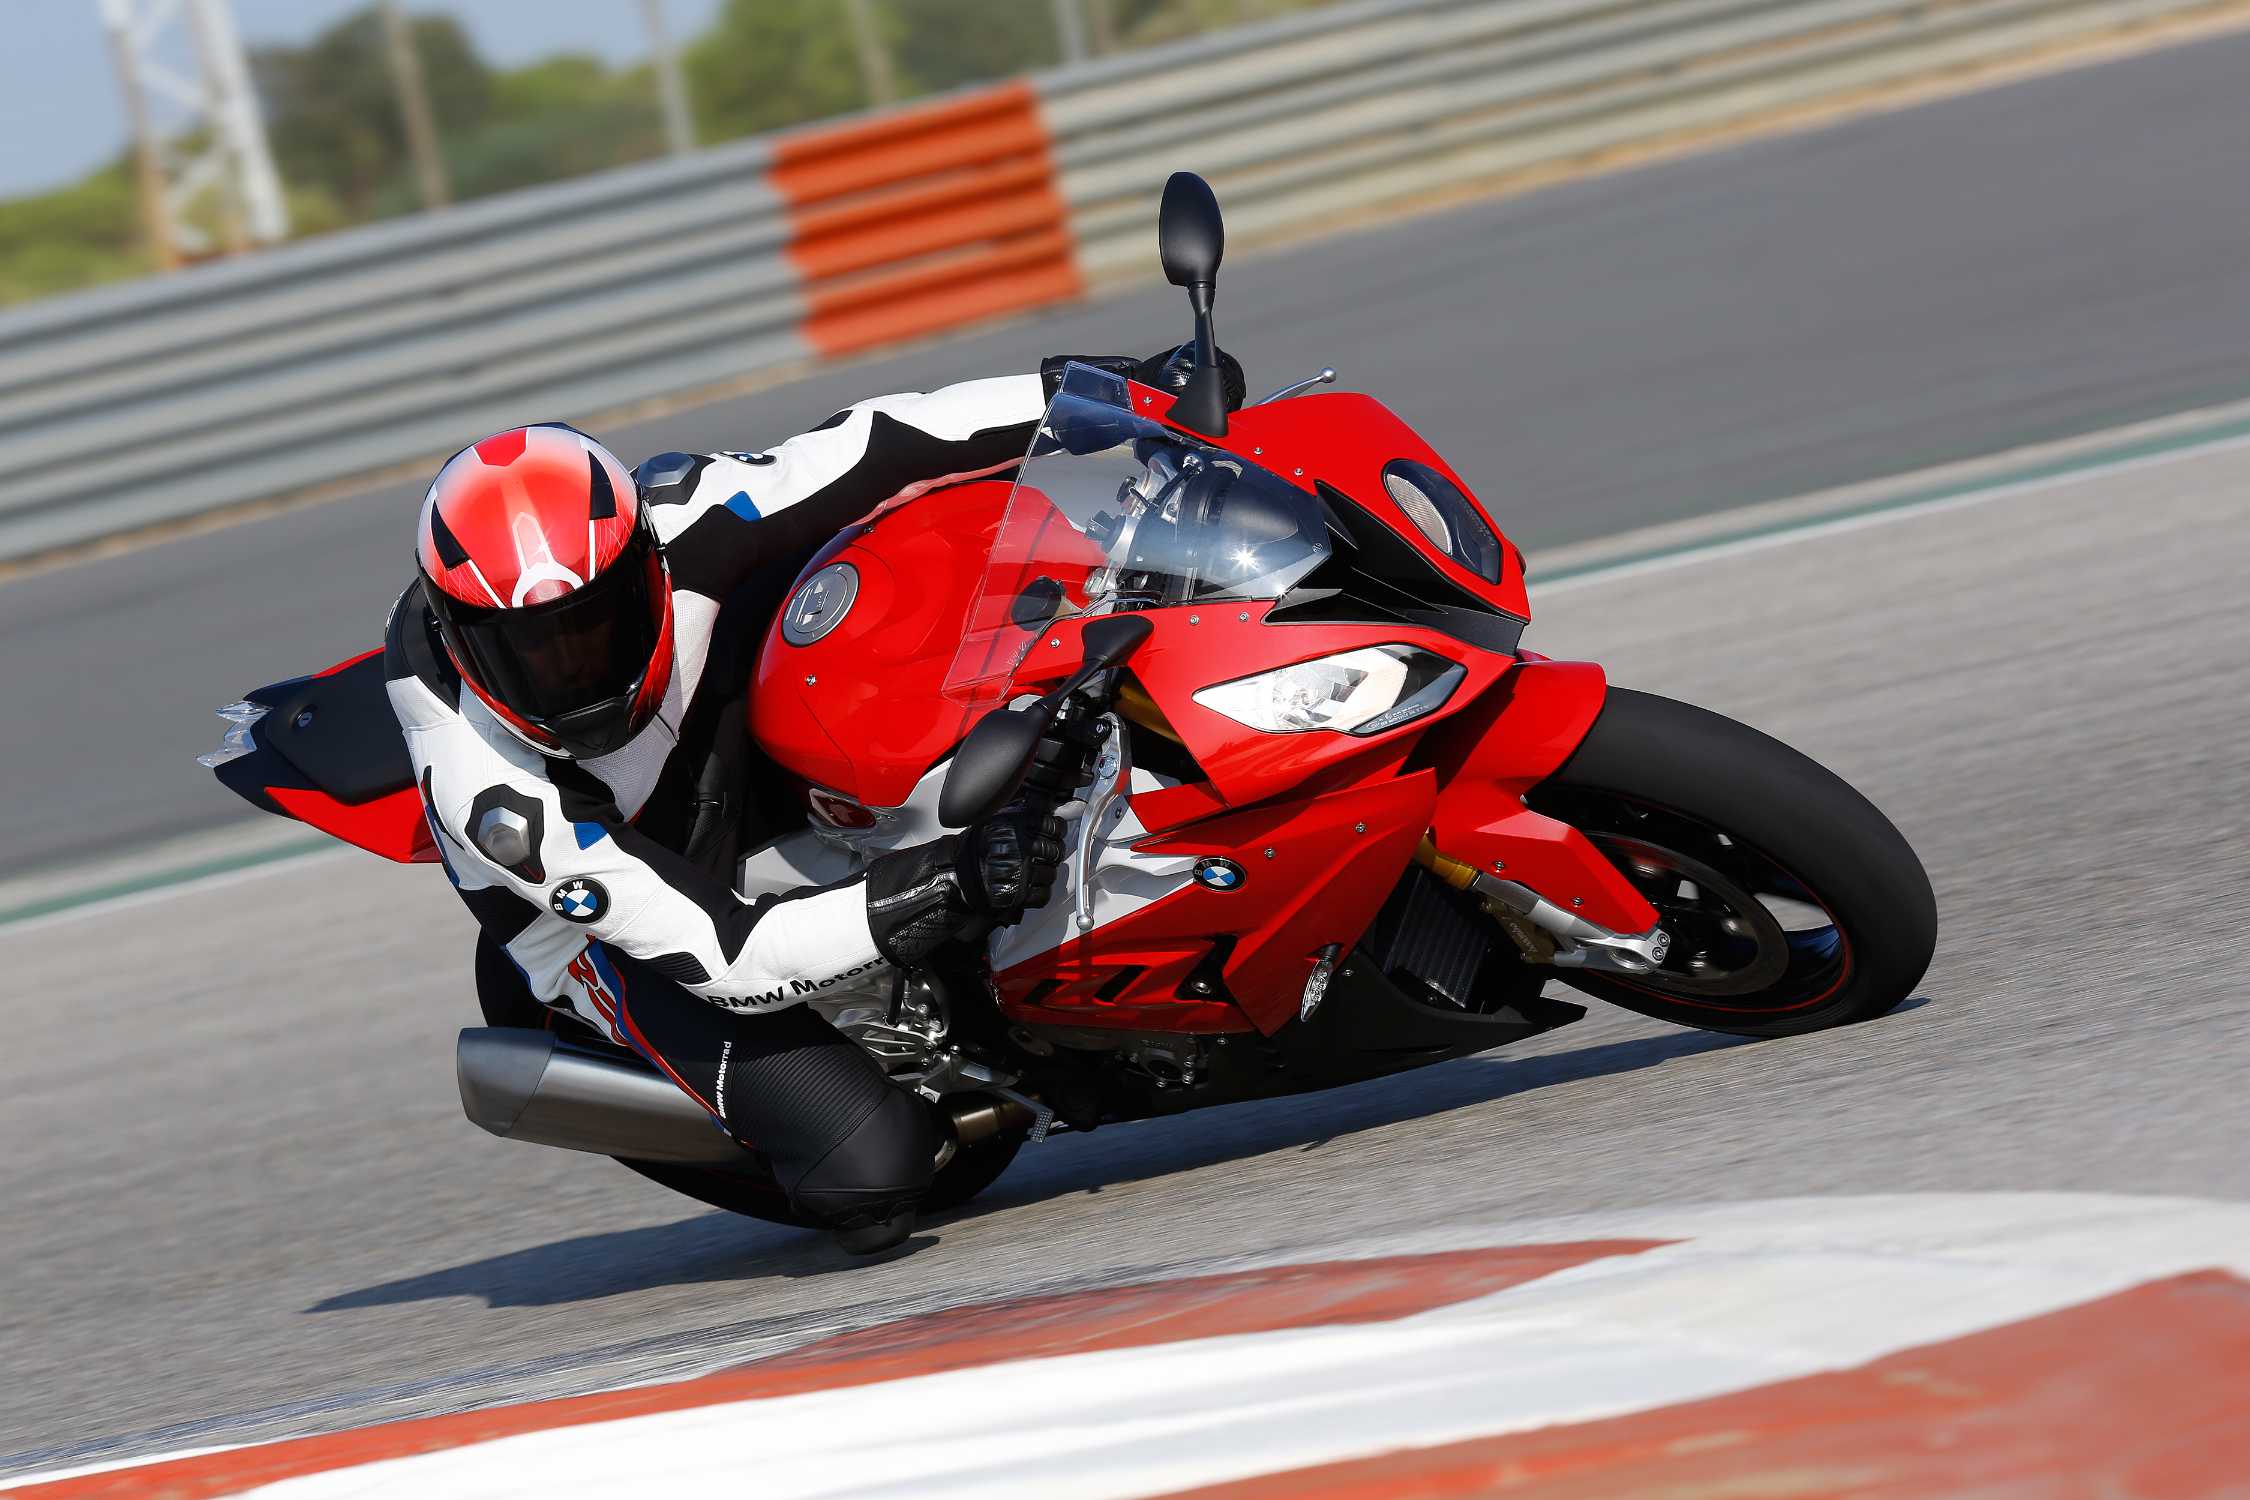 The New Bmw S 1000 Rr